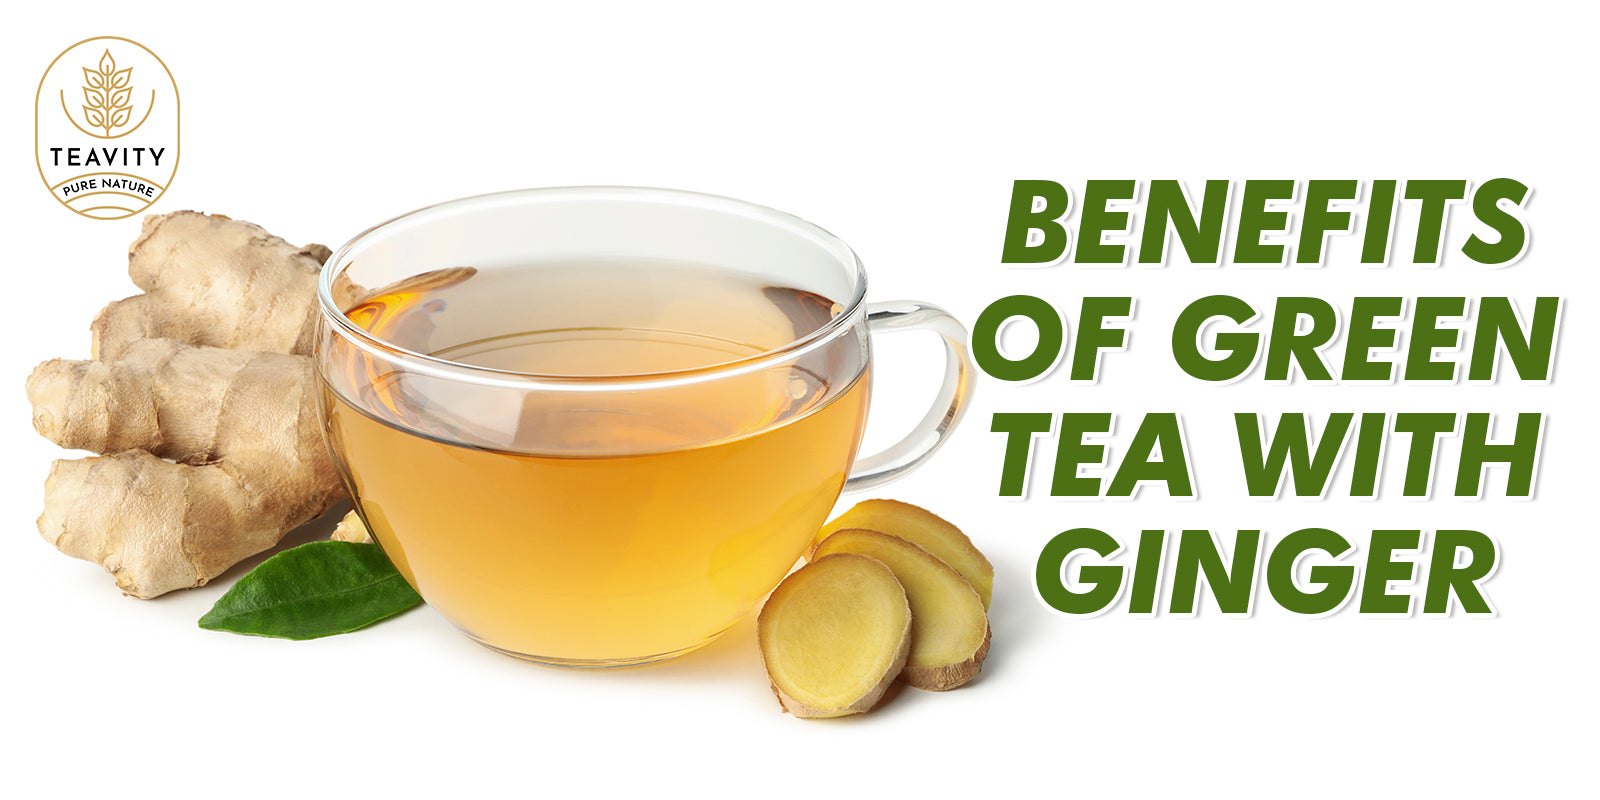 Benefits of Green Tea with Ginger